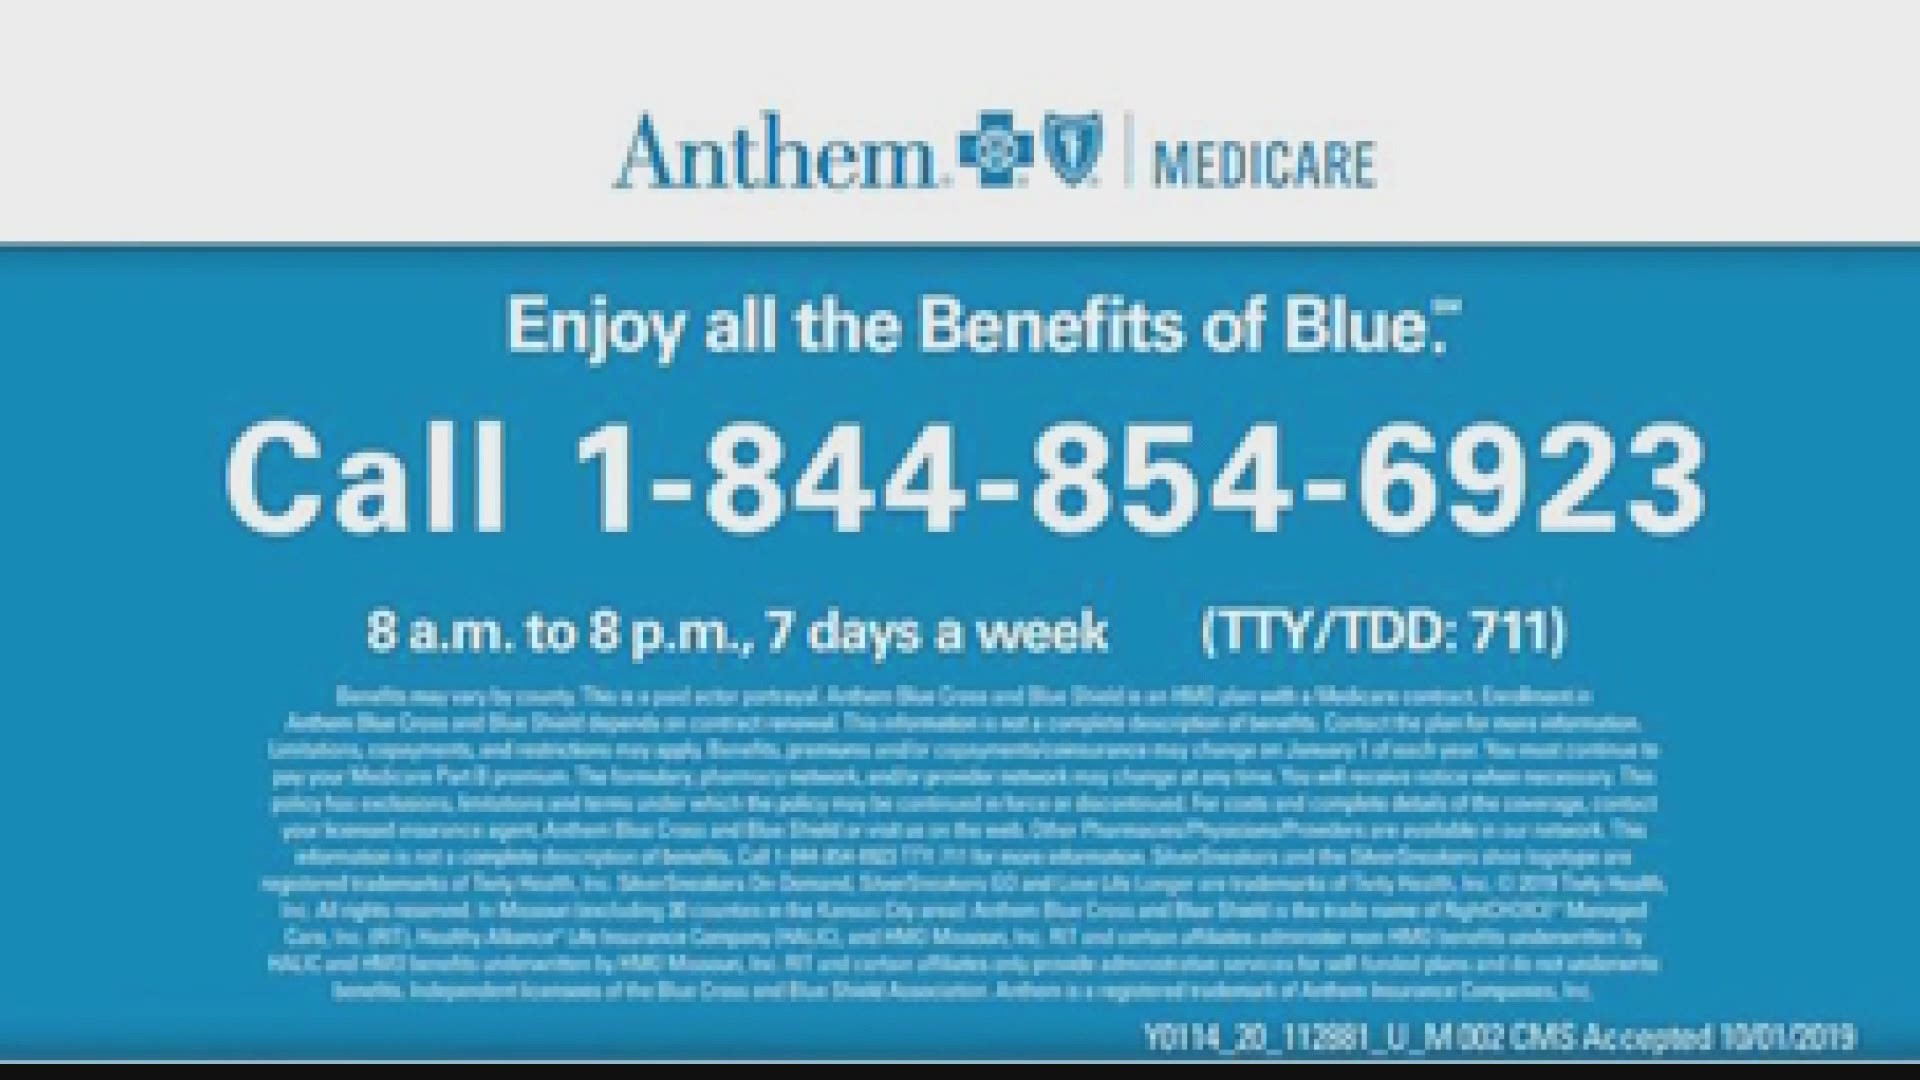 Martin Esquivel from Anthem Blue Cross & Blue Shield is here to answer our questions about Medicare Open Enrollment.